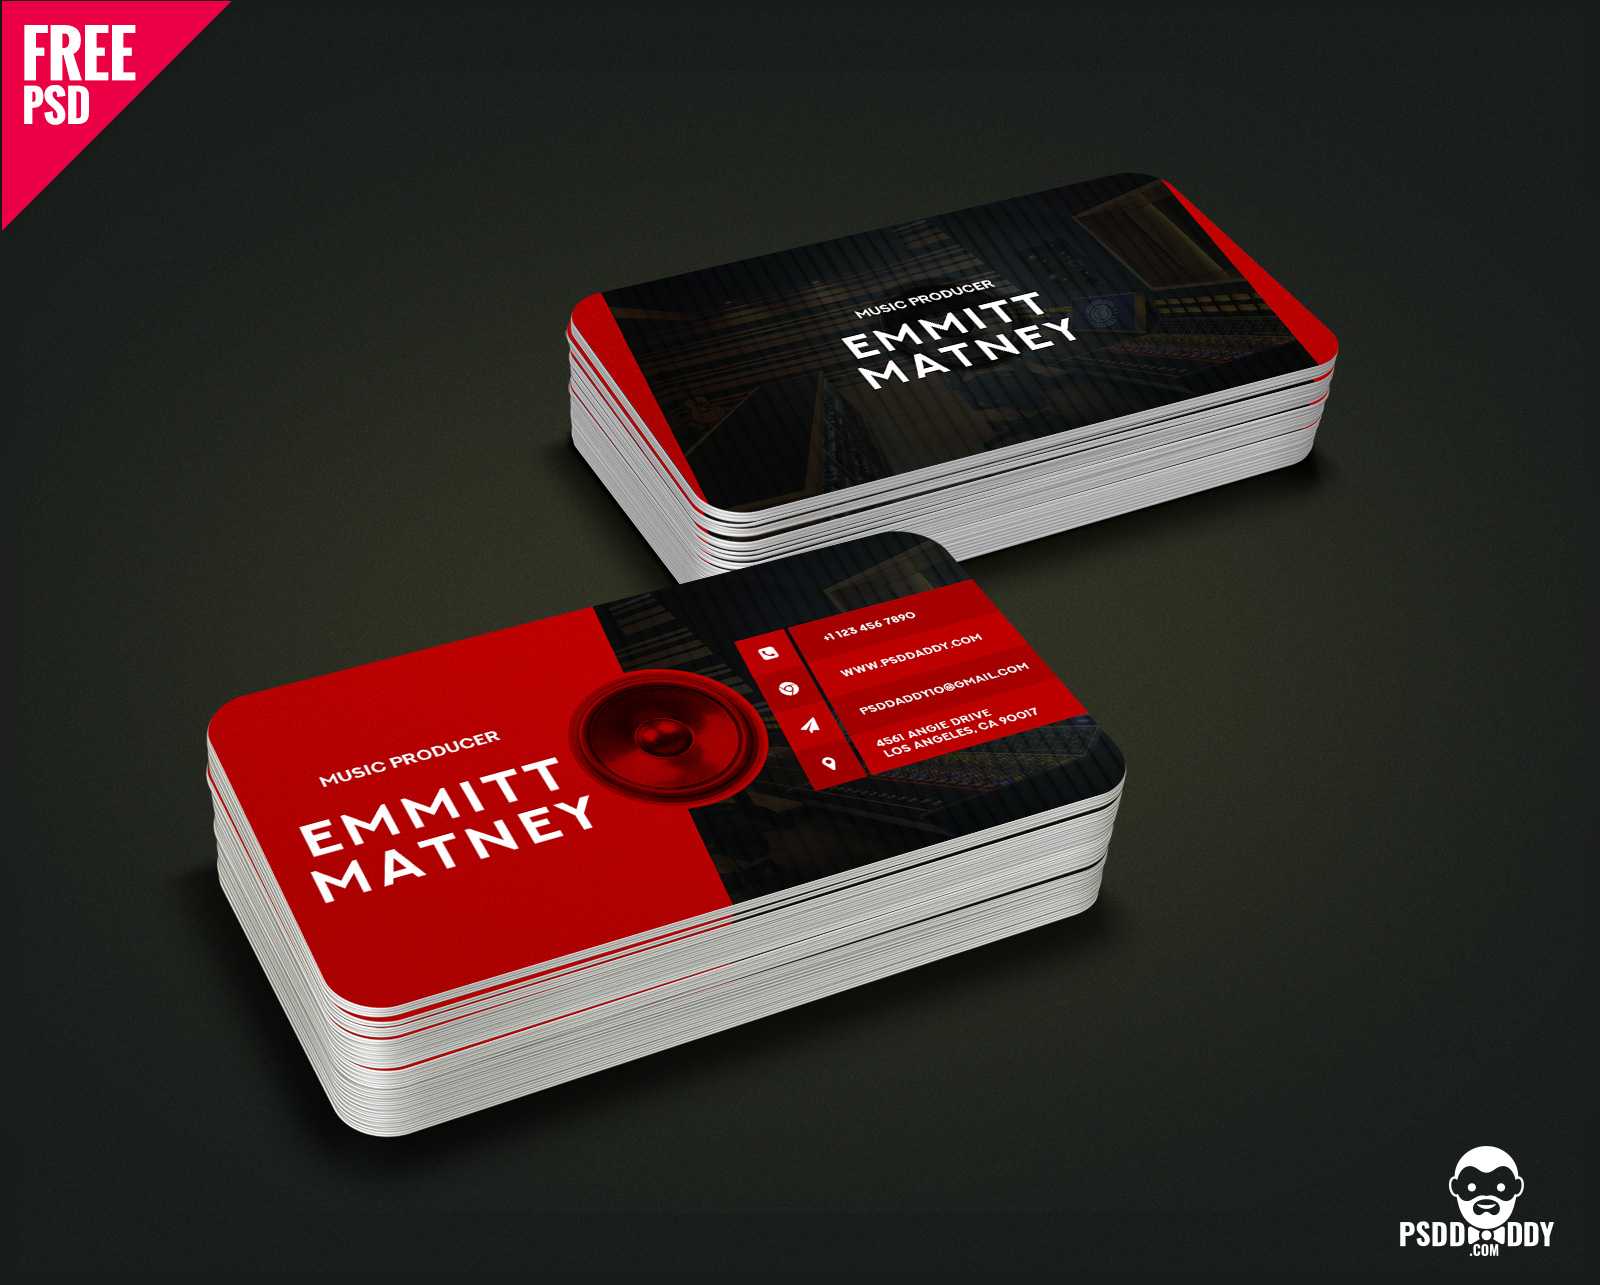 Download] Music Visiting Card Free Psd | Psddaddy Intended For Templates For Visiting Cards Free Downloads